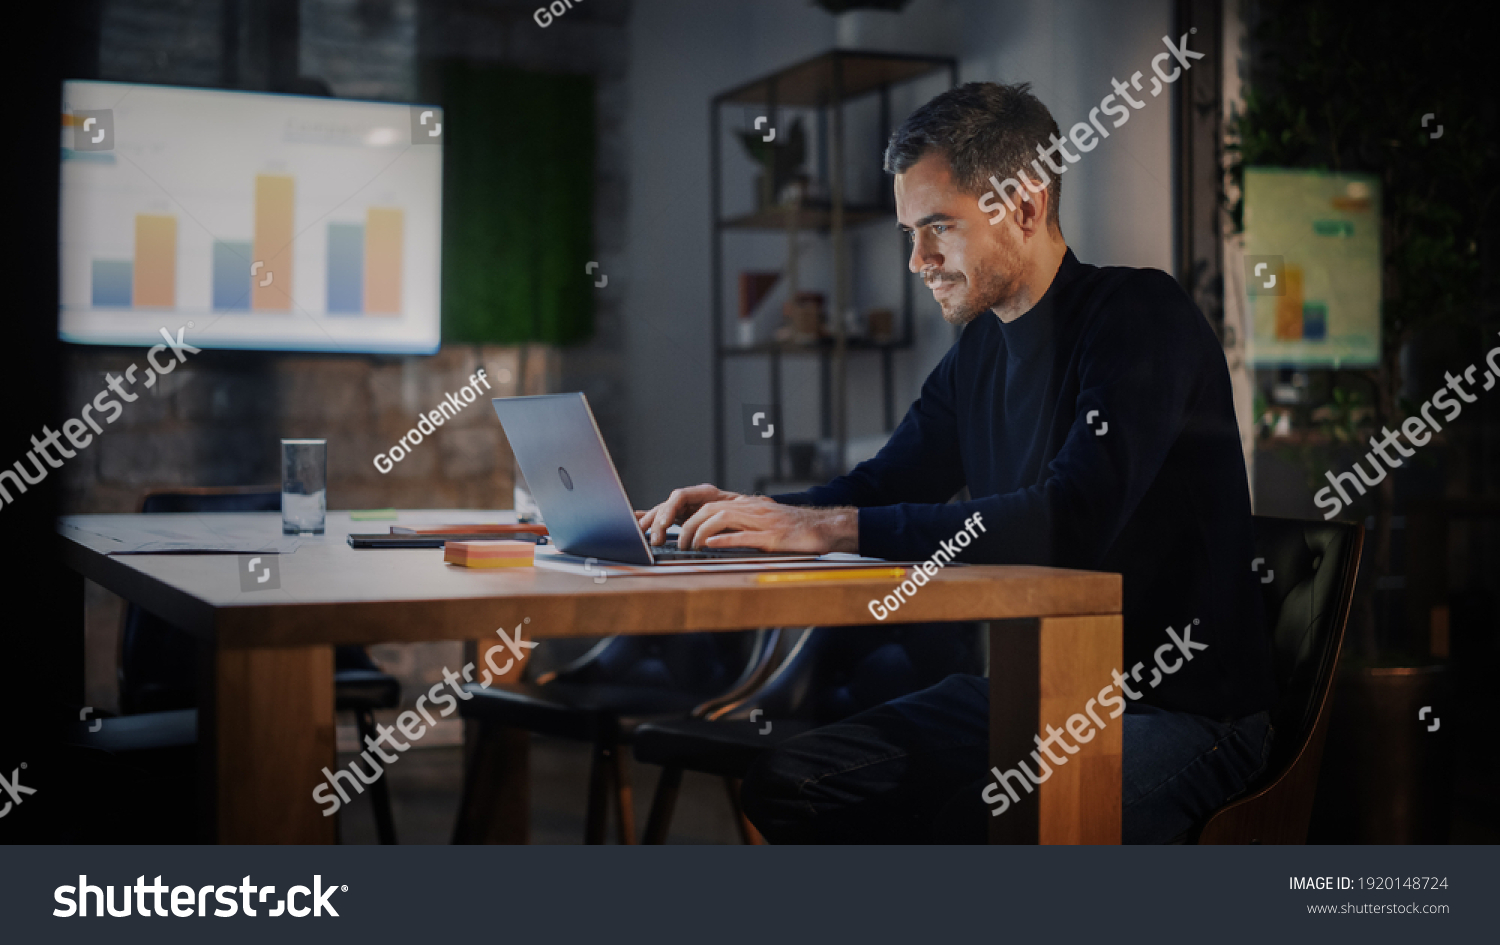 Handsome Caucasian Male is Working on Laptop Computer while Sitting Behind a Conference Table in Meeting Room in an Creative Agency. Project Manager is Busy With Business Strategy and Development. #1920148724